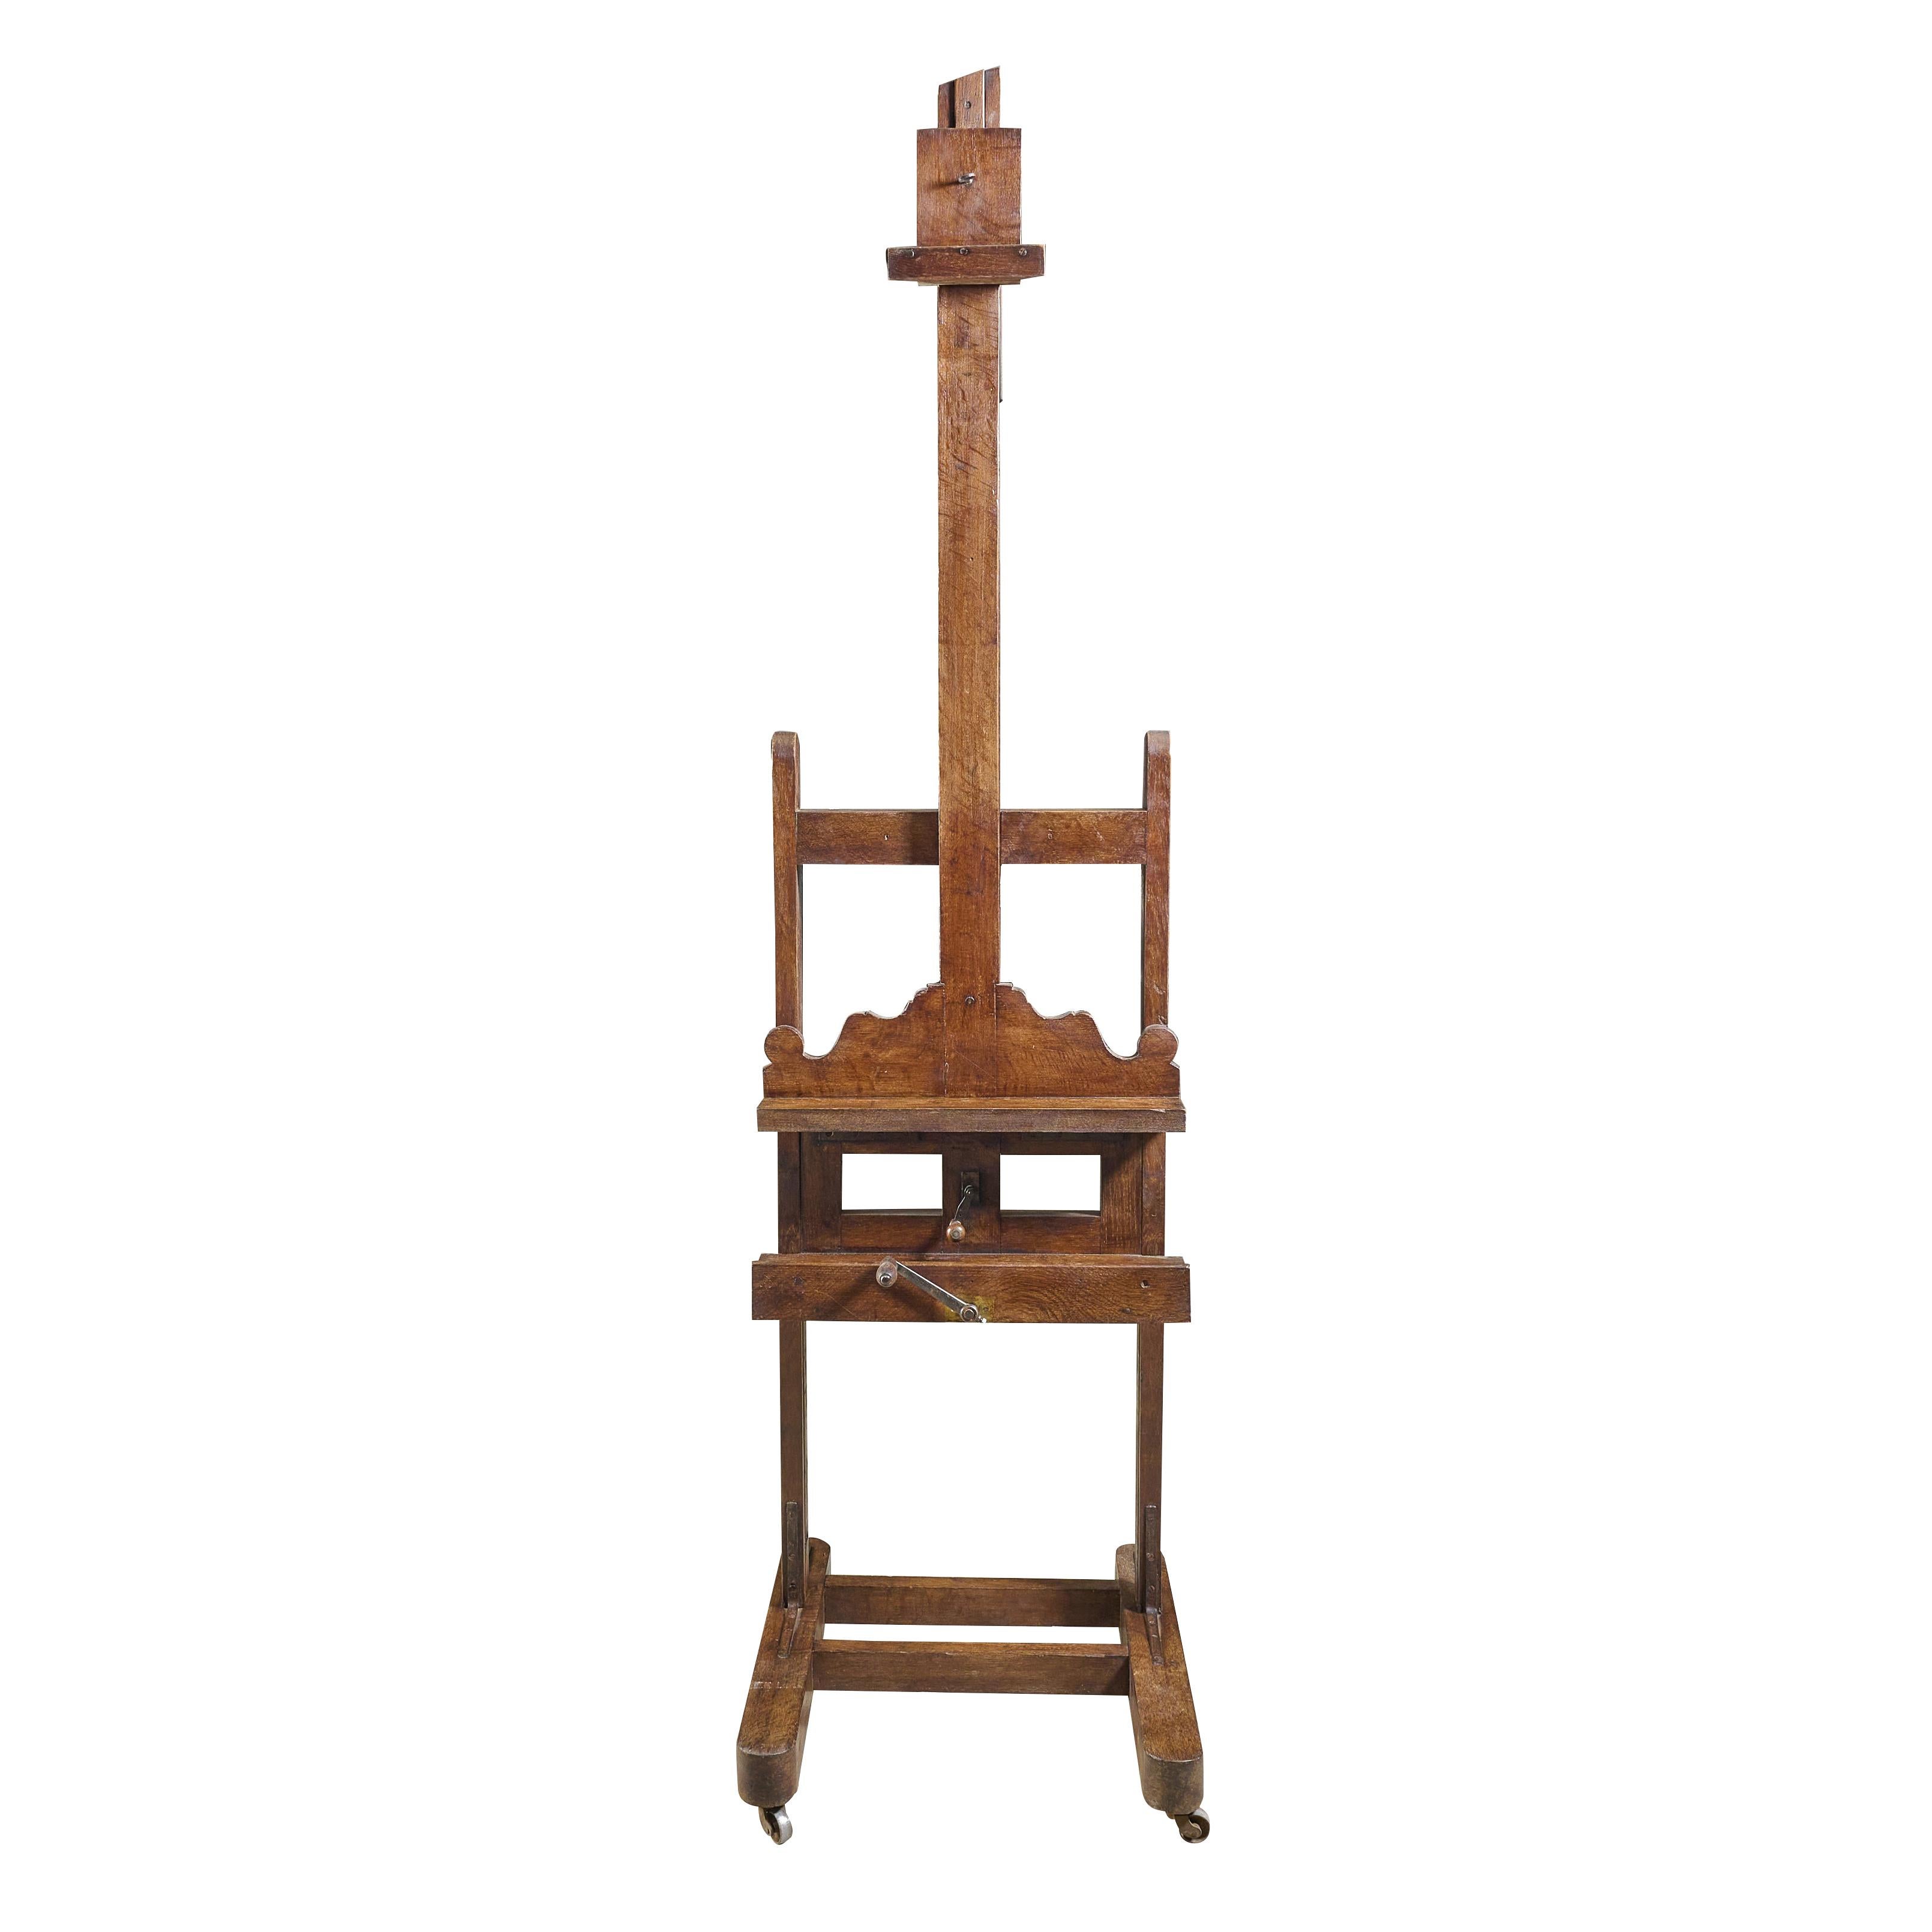 Fantastic oak artist easel with crank and adjustable angle. Extremely cool and rare.

